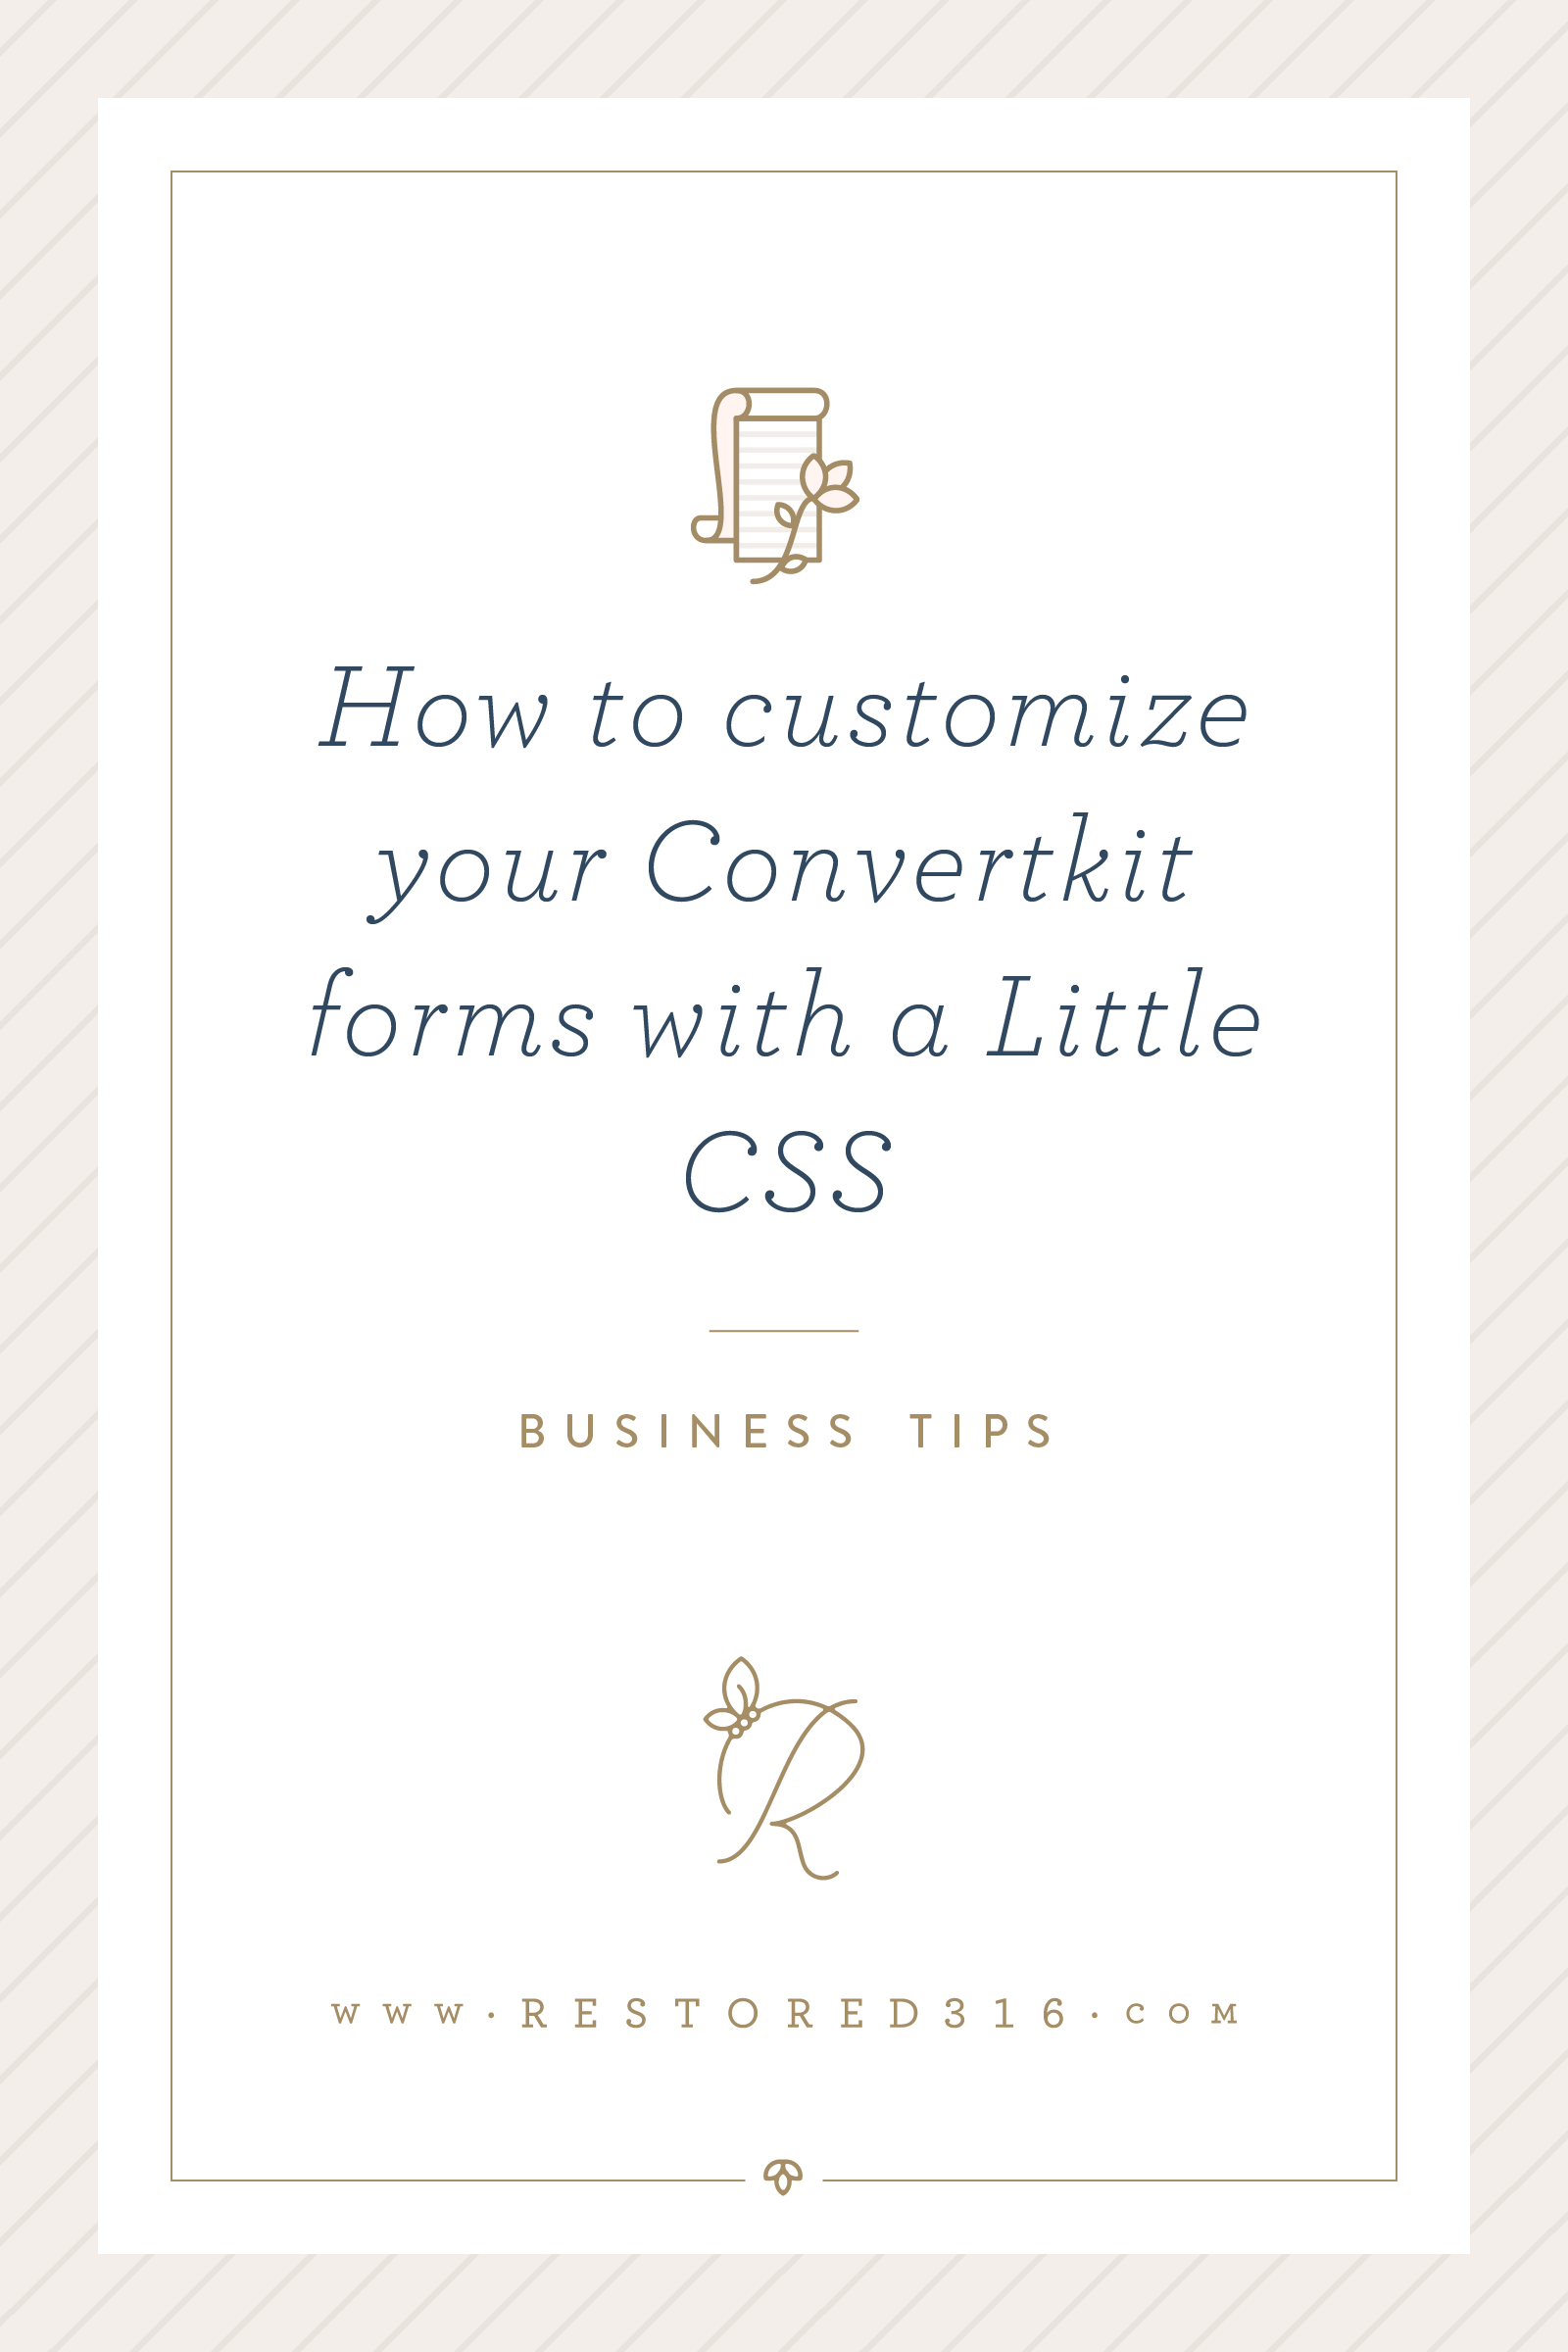 How to customize your ConvertKit forms with a little CSS